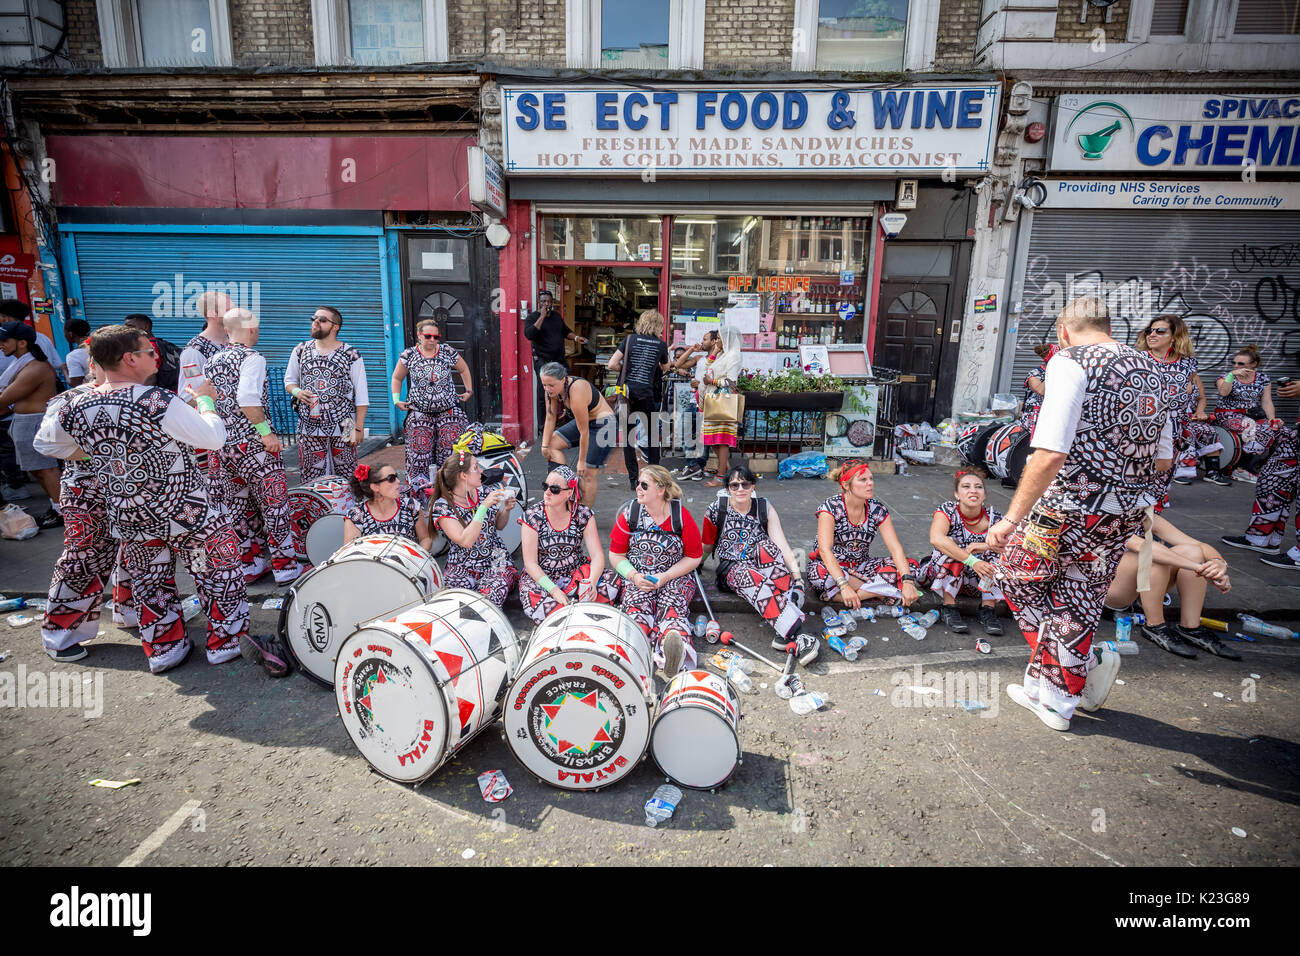 London, UK. 28th Aug, 2017. Notting Hill Carnival 2017. Europe's biggest street festival brings thousands on to the street to party Credit: Guy Corbishley/Alamy Live News Stock Photo